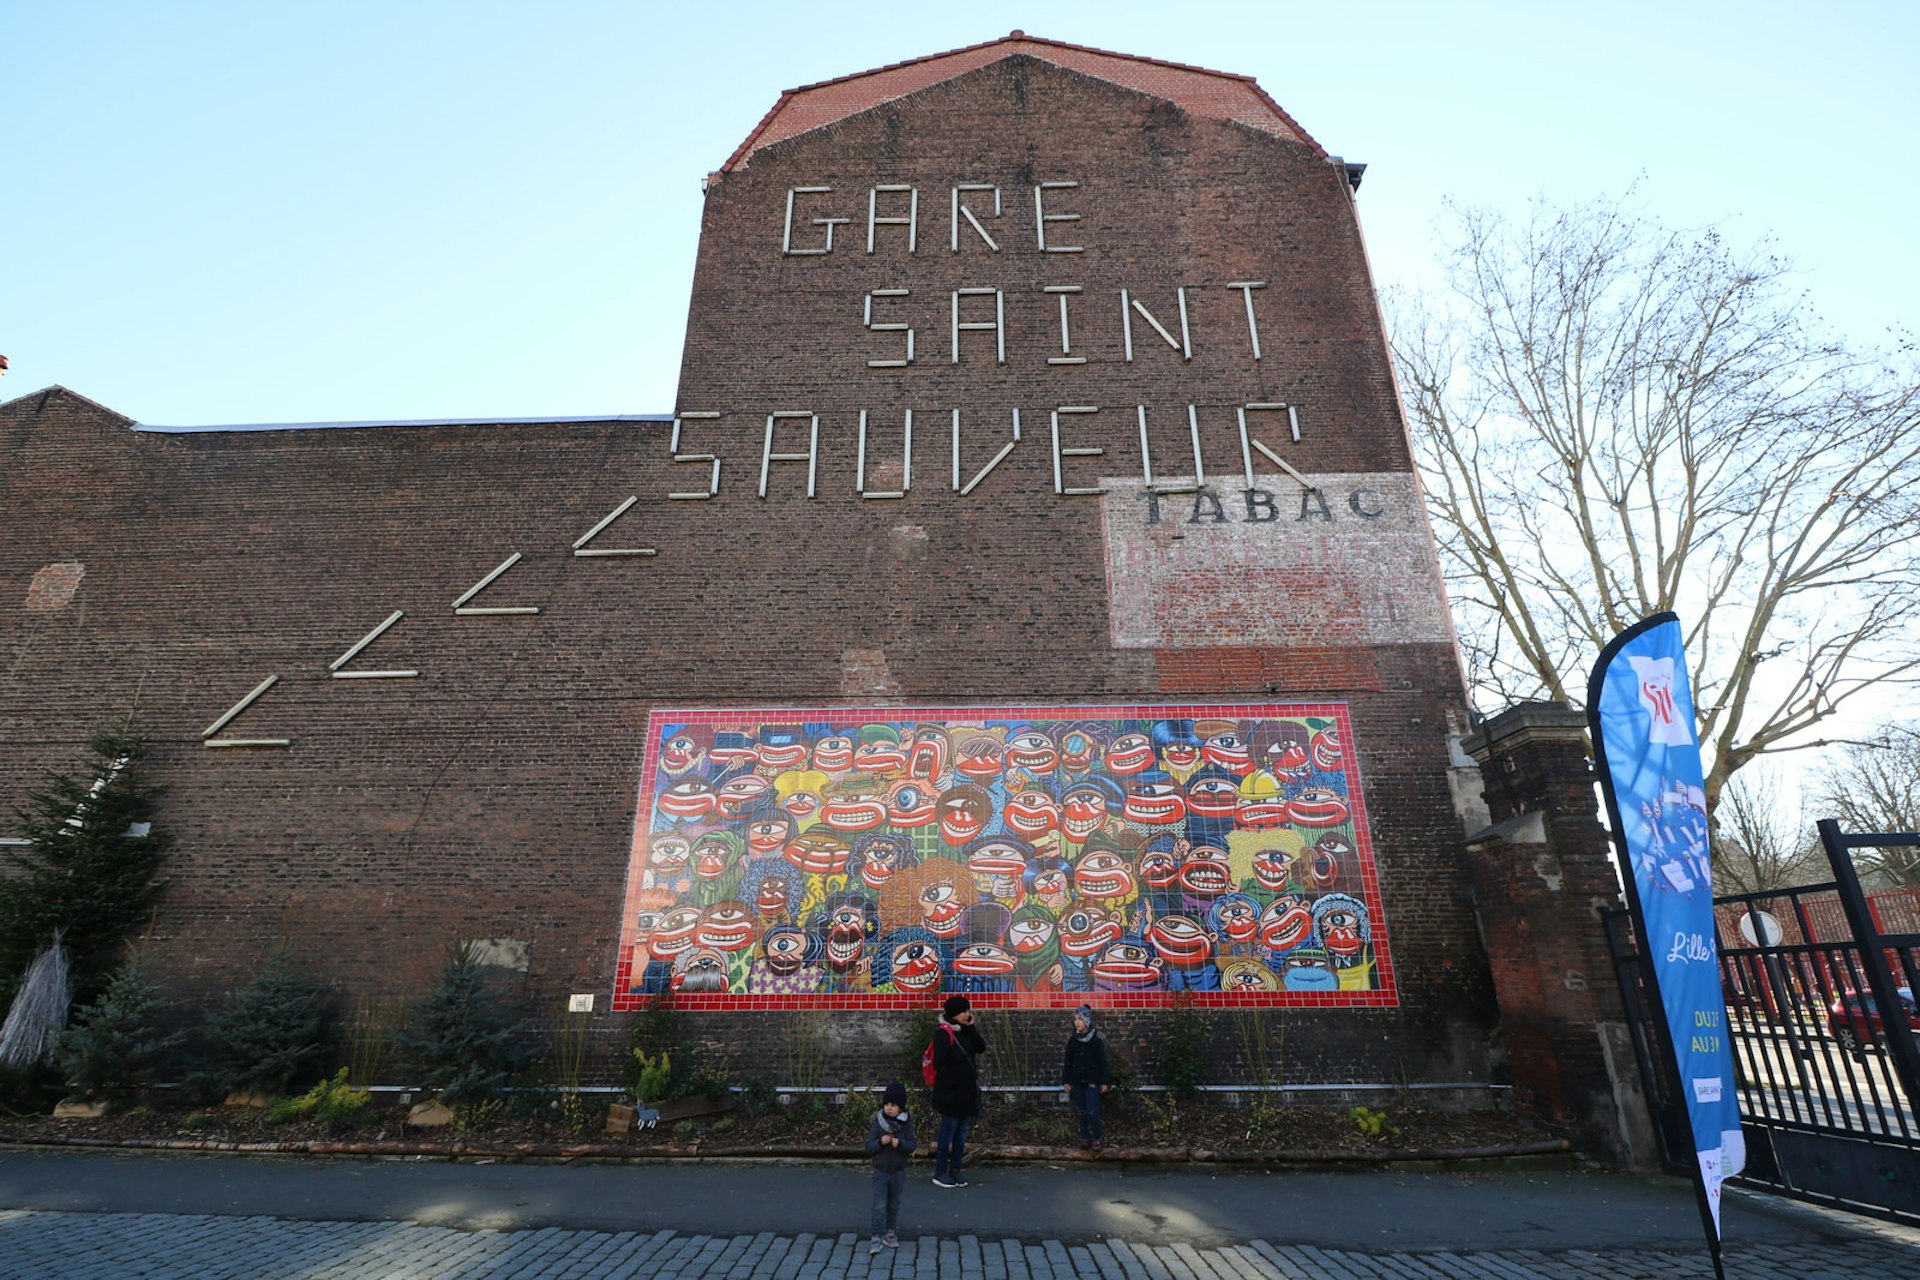 The exterior of a large red-brick building labelled Gare Saint Sauveur, with a colourful mural of eyes and teeth